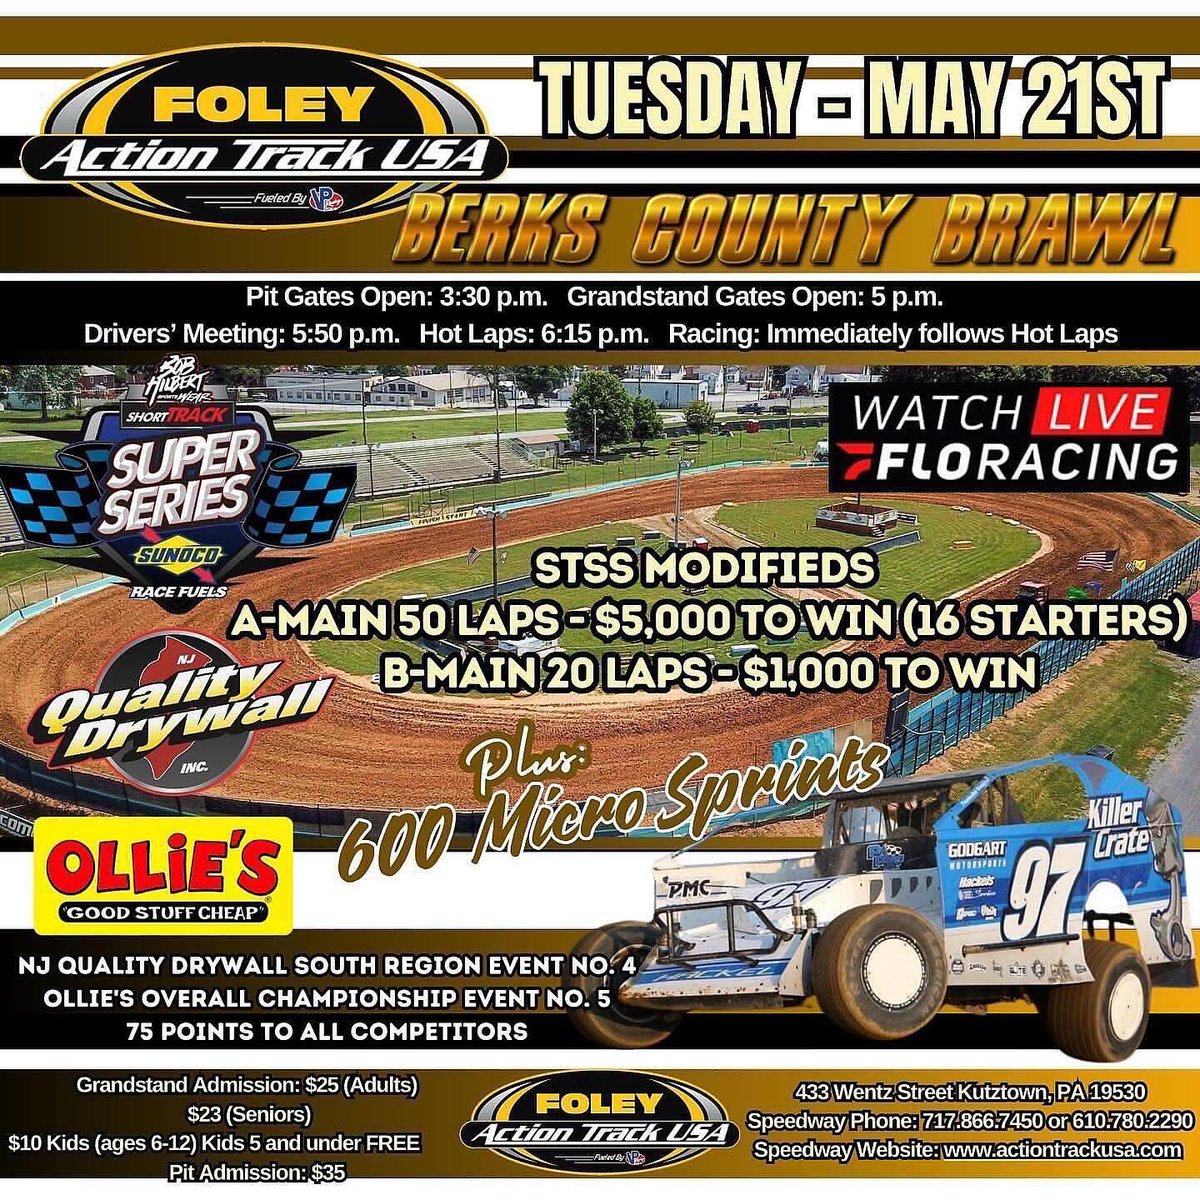 𝘽𝙍𝙄𝙉𝙂𝙄𝙉𝙂 𝙏𝙃𝙀 𝘼𝘾𝙏𝙄𝙊𝙉 𝙏𝙊 @ActionTrackUSA :  The @BobHilbertSW Short Track Super Series Modifieds invade the Kutztown Fairgrounds on Tuesday, May 21 for a true Berks County Brawl. Last year’s star Mike Gular will be there. Will you?